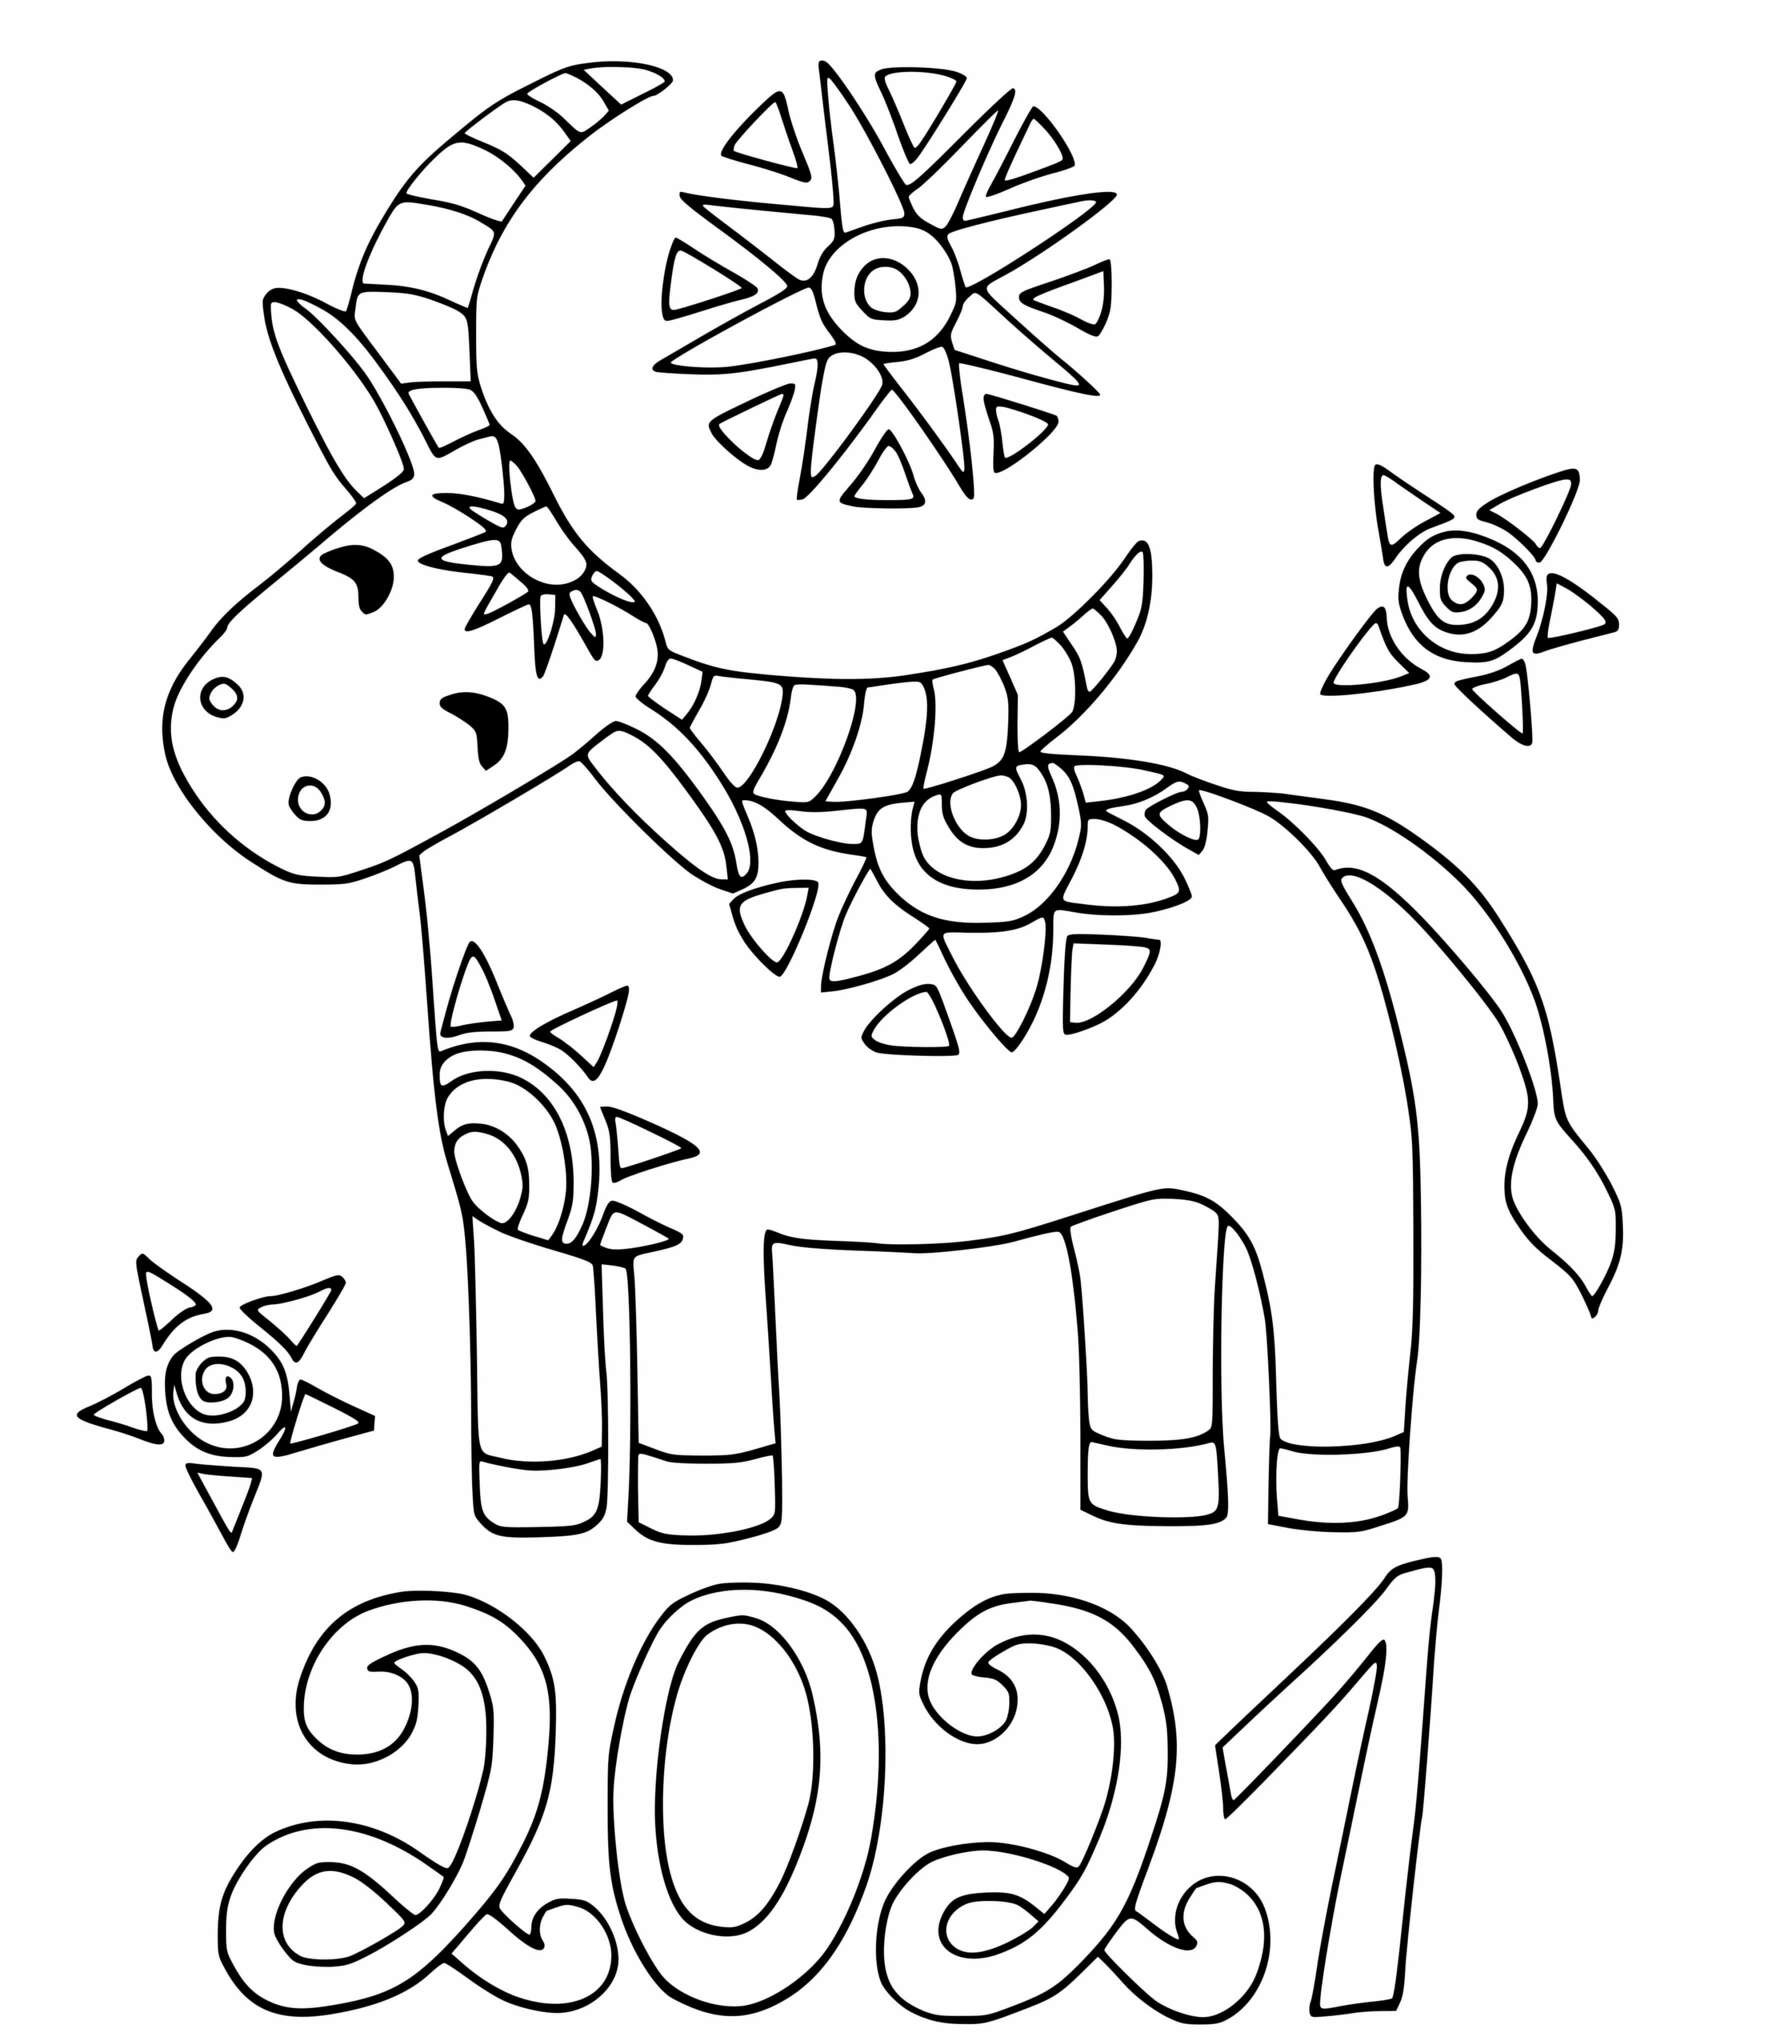 2021 New Year Coloring Page